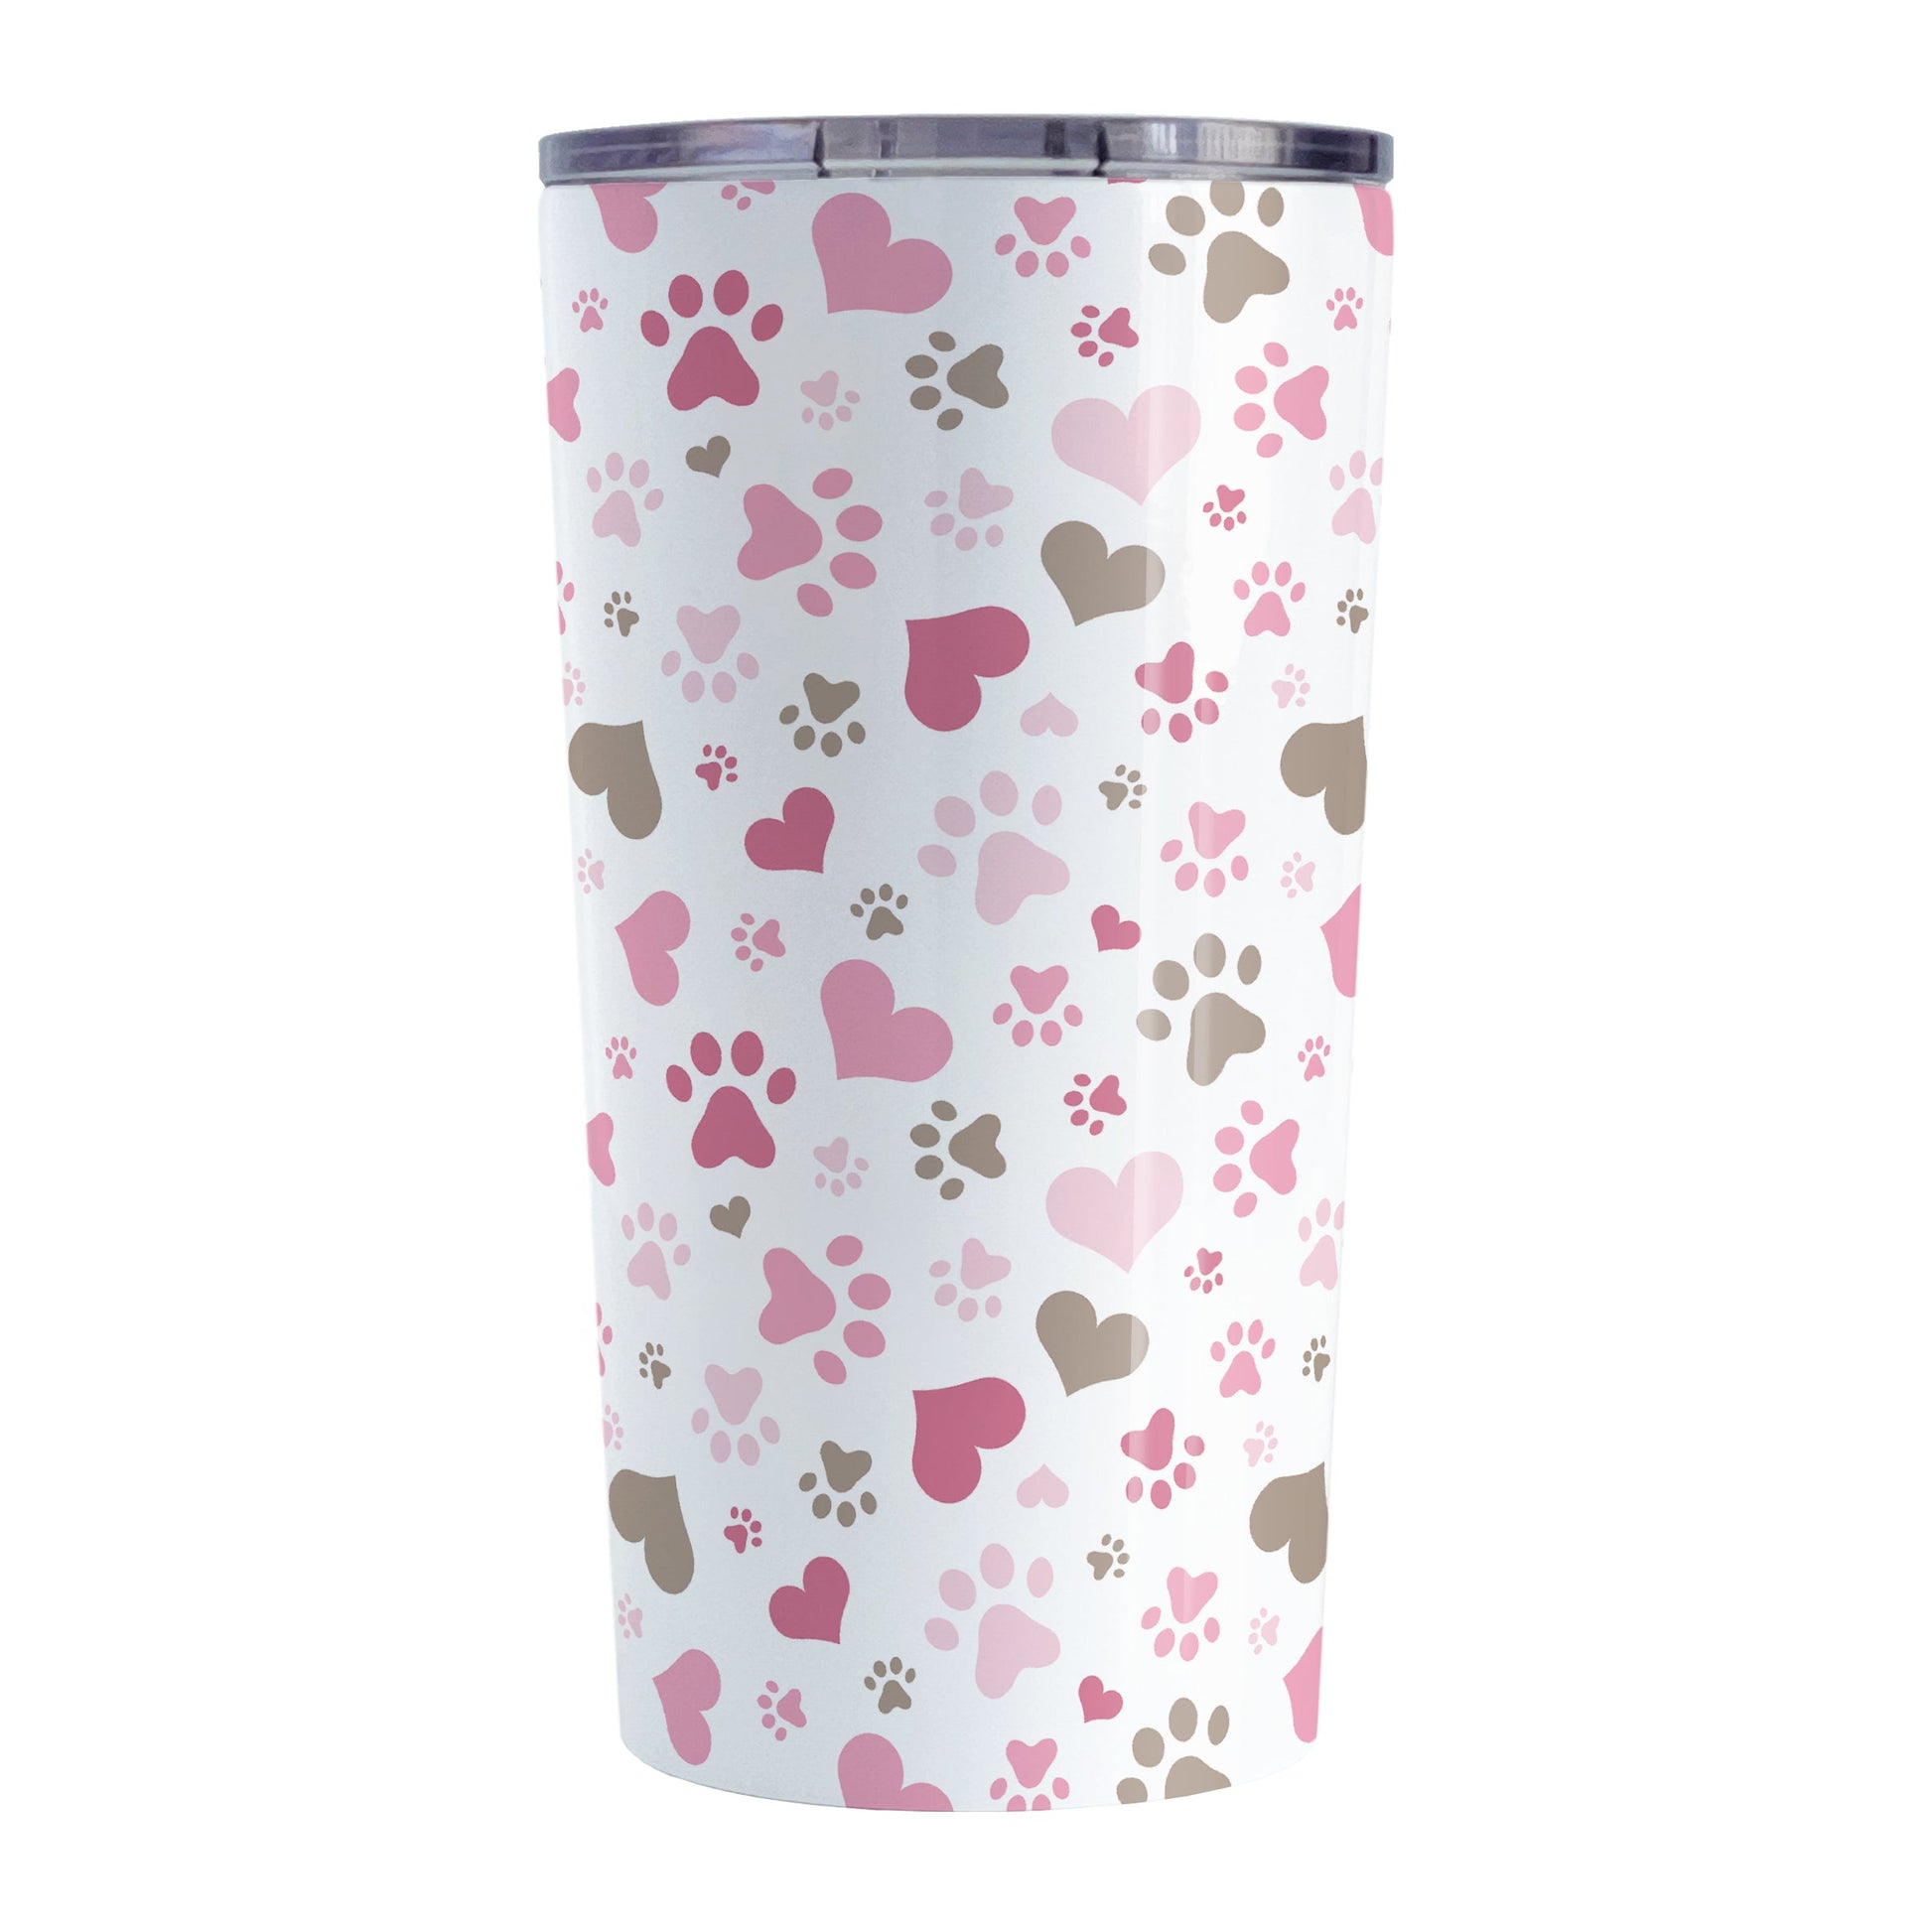 Pink Hearts and Paw Prints Tumbler Cup (20oz) at Amy's Coffee Mugs. A stainless steel insulated tumbler cup designed with a pattern of hearts and paw prints in brown and different shades of pink that wraps around the cup. This tumbler cup is perfect for people love dogs and cute paw print designs.